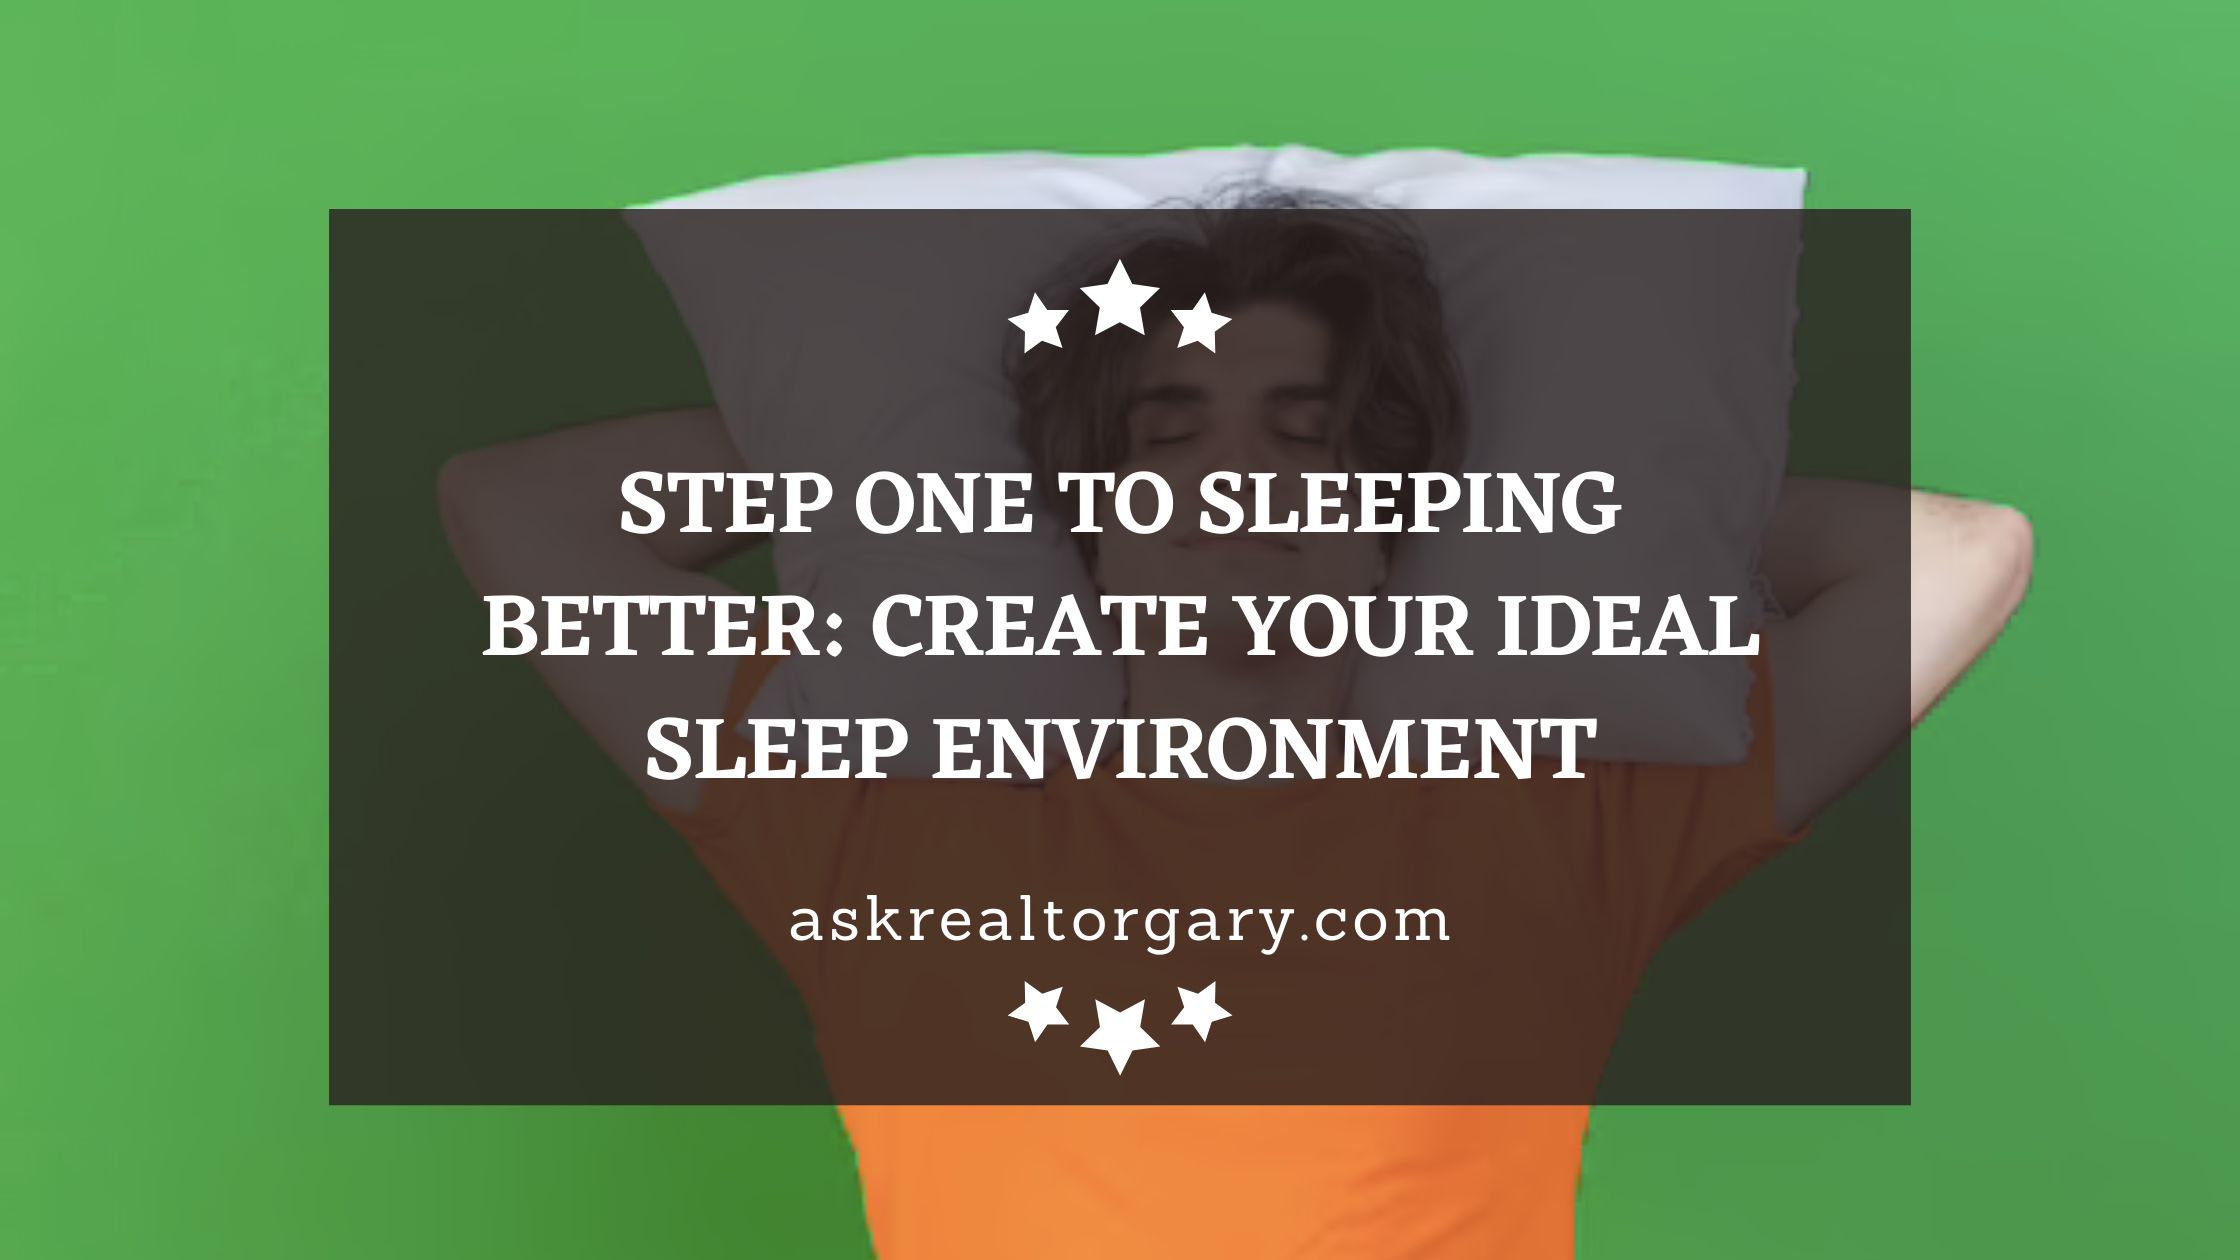 Step One to Sleeping Better